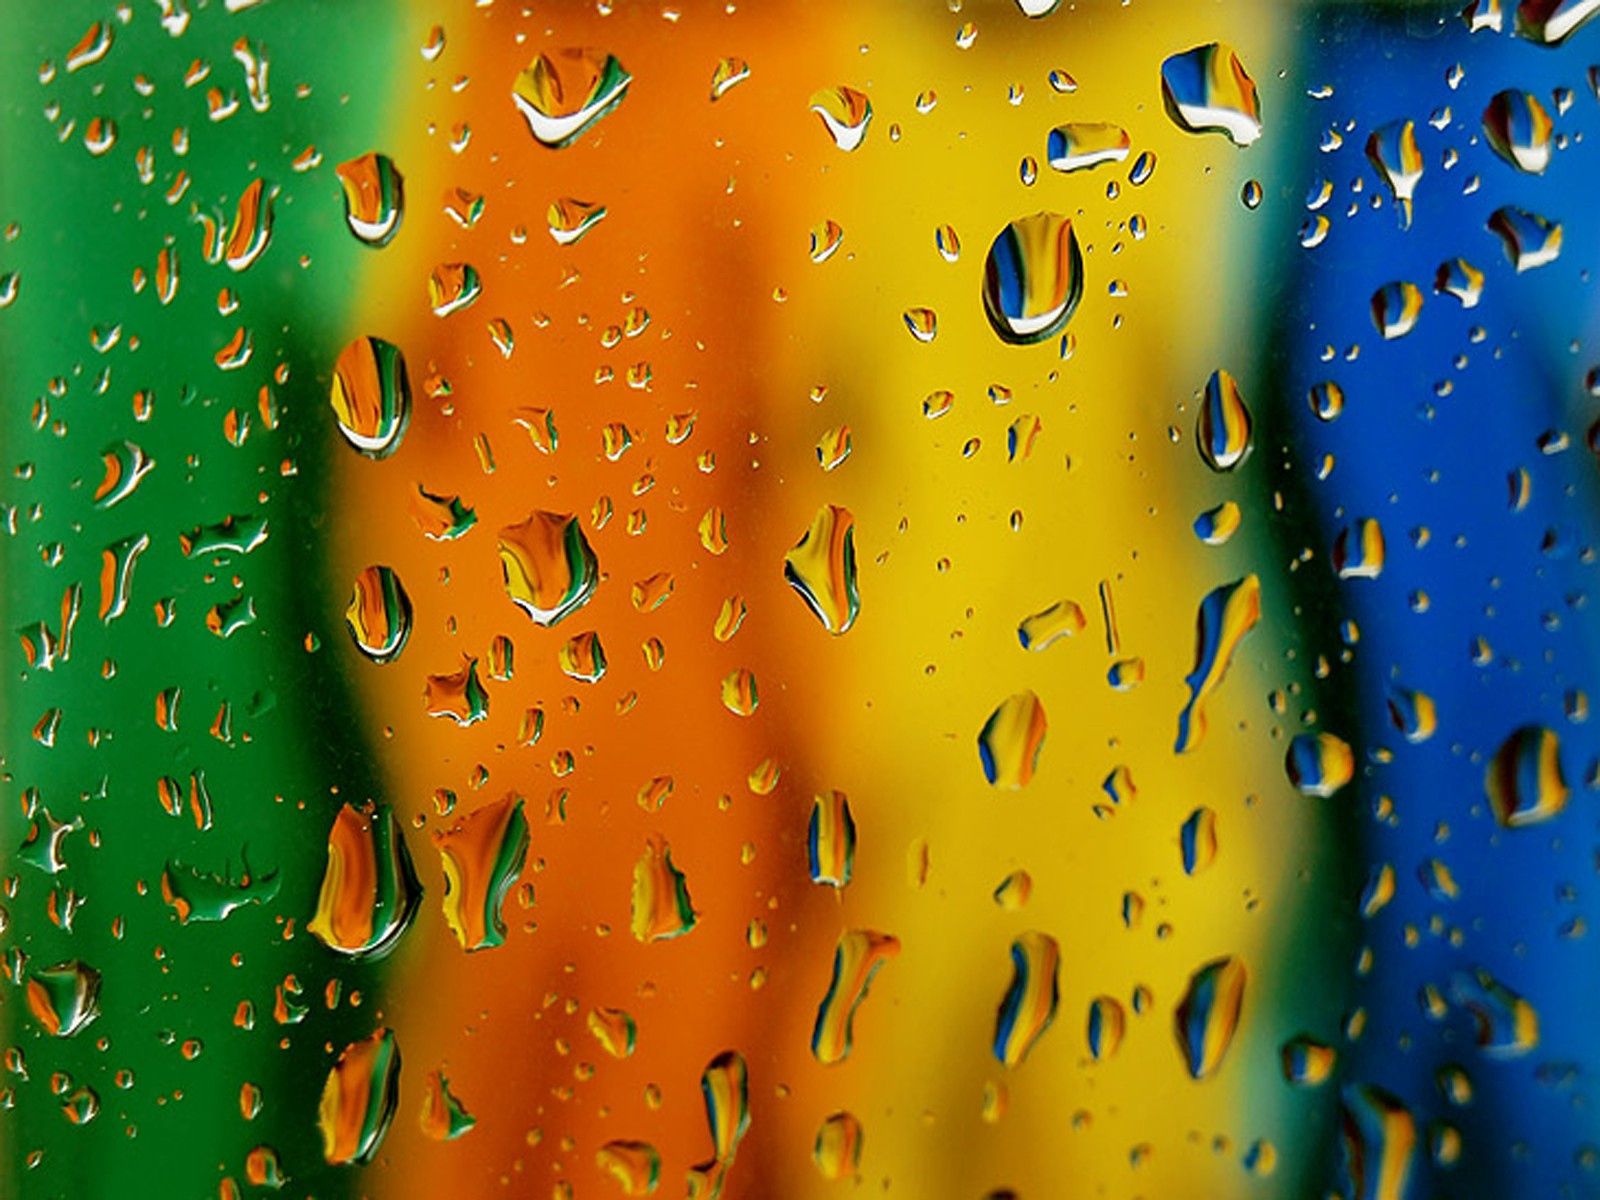 drops, multicolored, motley, texture, textures, surface